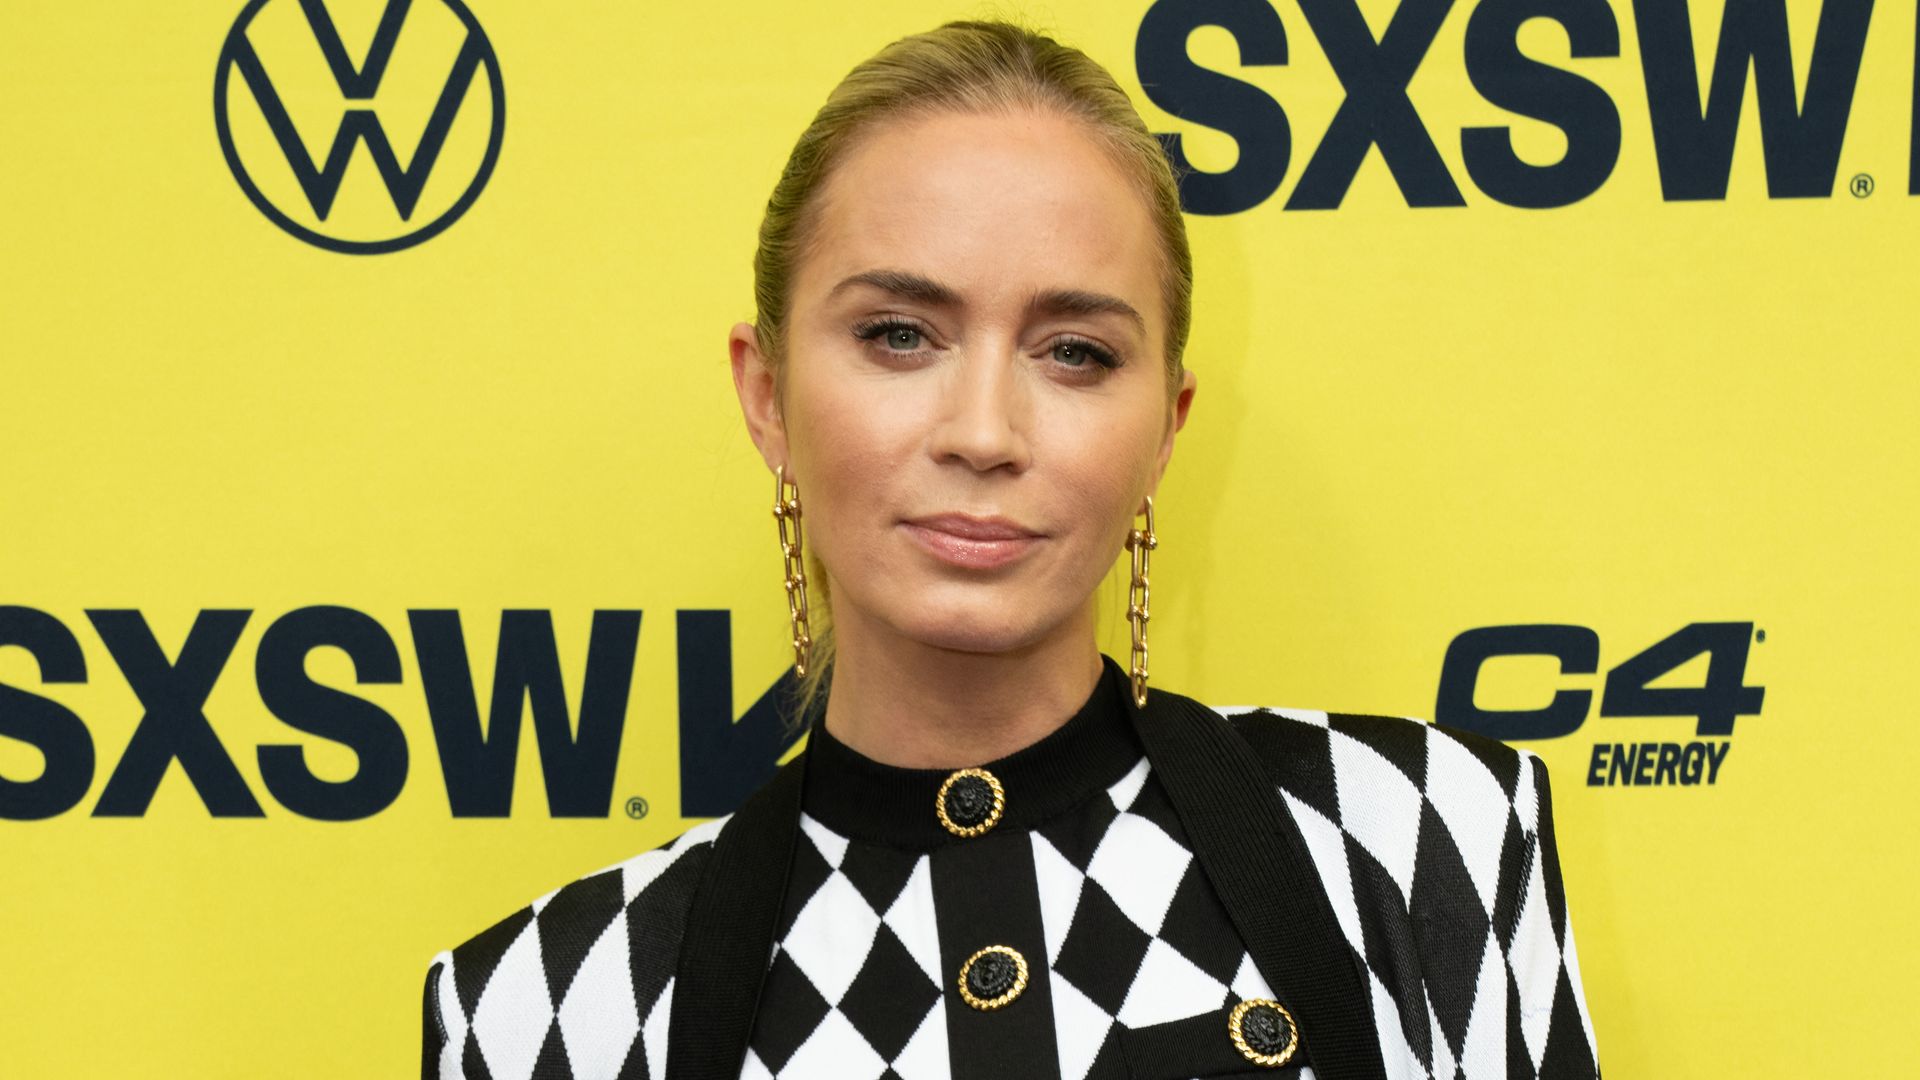 US-British actress Emily Blunt attends "The Fall Guy" premiere at the Paramount Theatre on March 12, 2024 in Austin, Texas as part of the 2024 SXSW Conference and Festival. (Photo by SUZANNE CORDEIRO / AFP) (Photo by SUZANNE CORDEIRO/AFP via Getty Images)